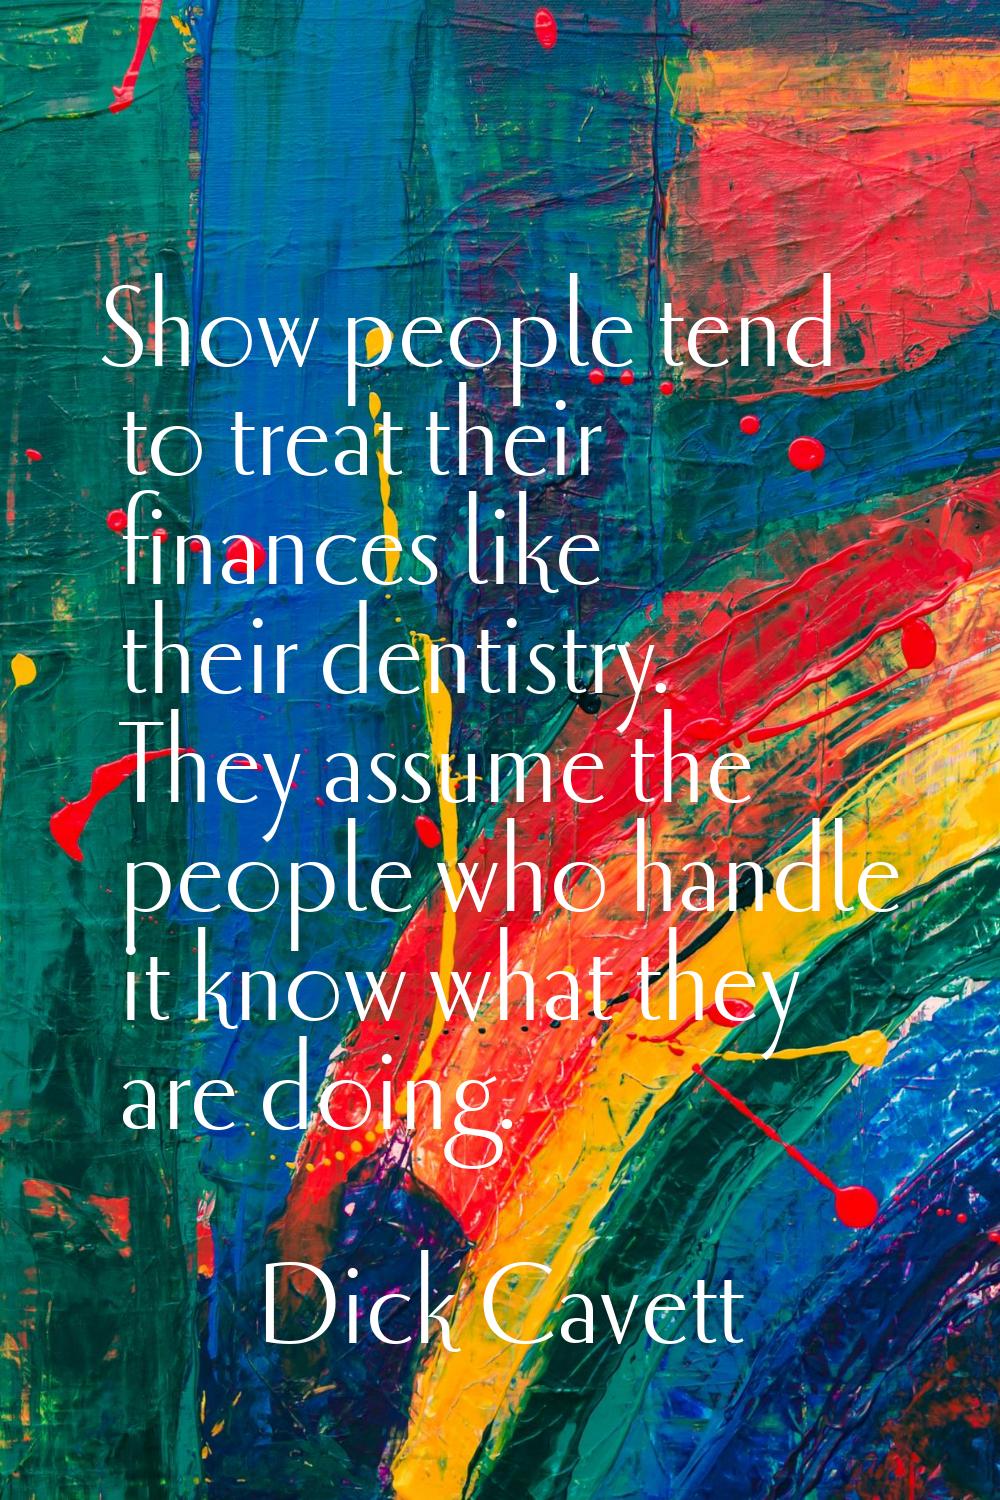 Show people tend to treat their finances like their dentistry. They assume the people who handle it